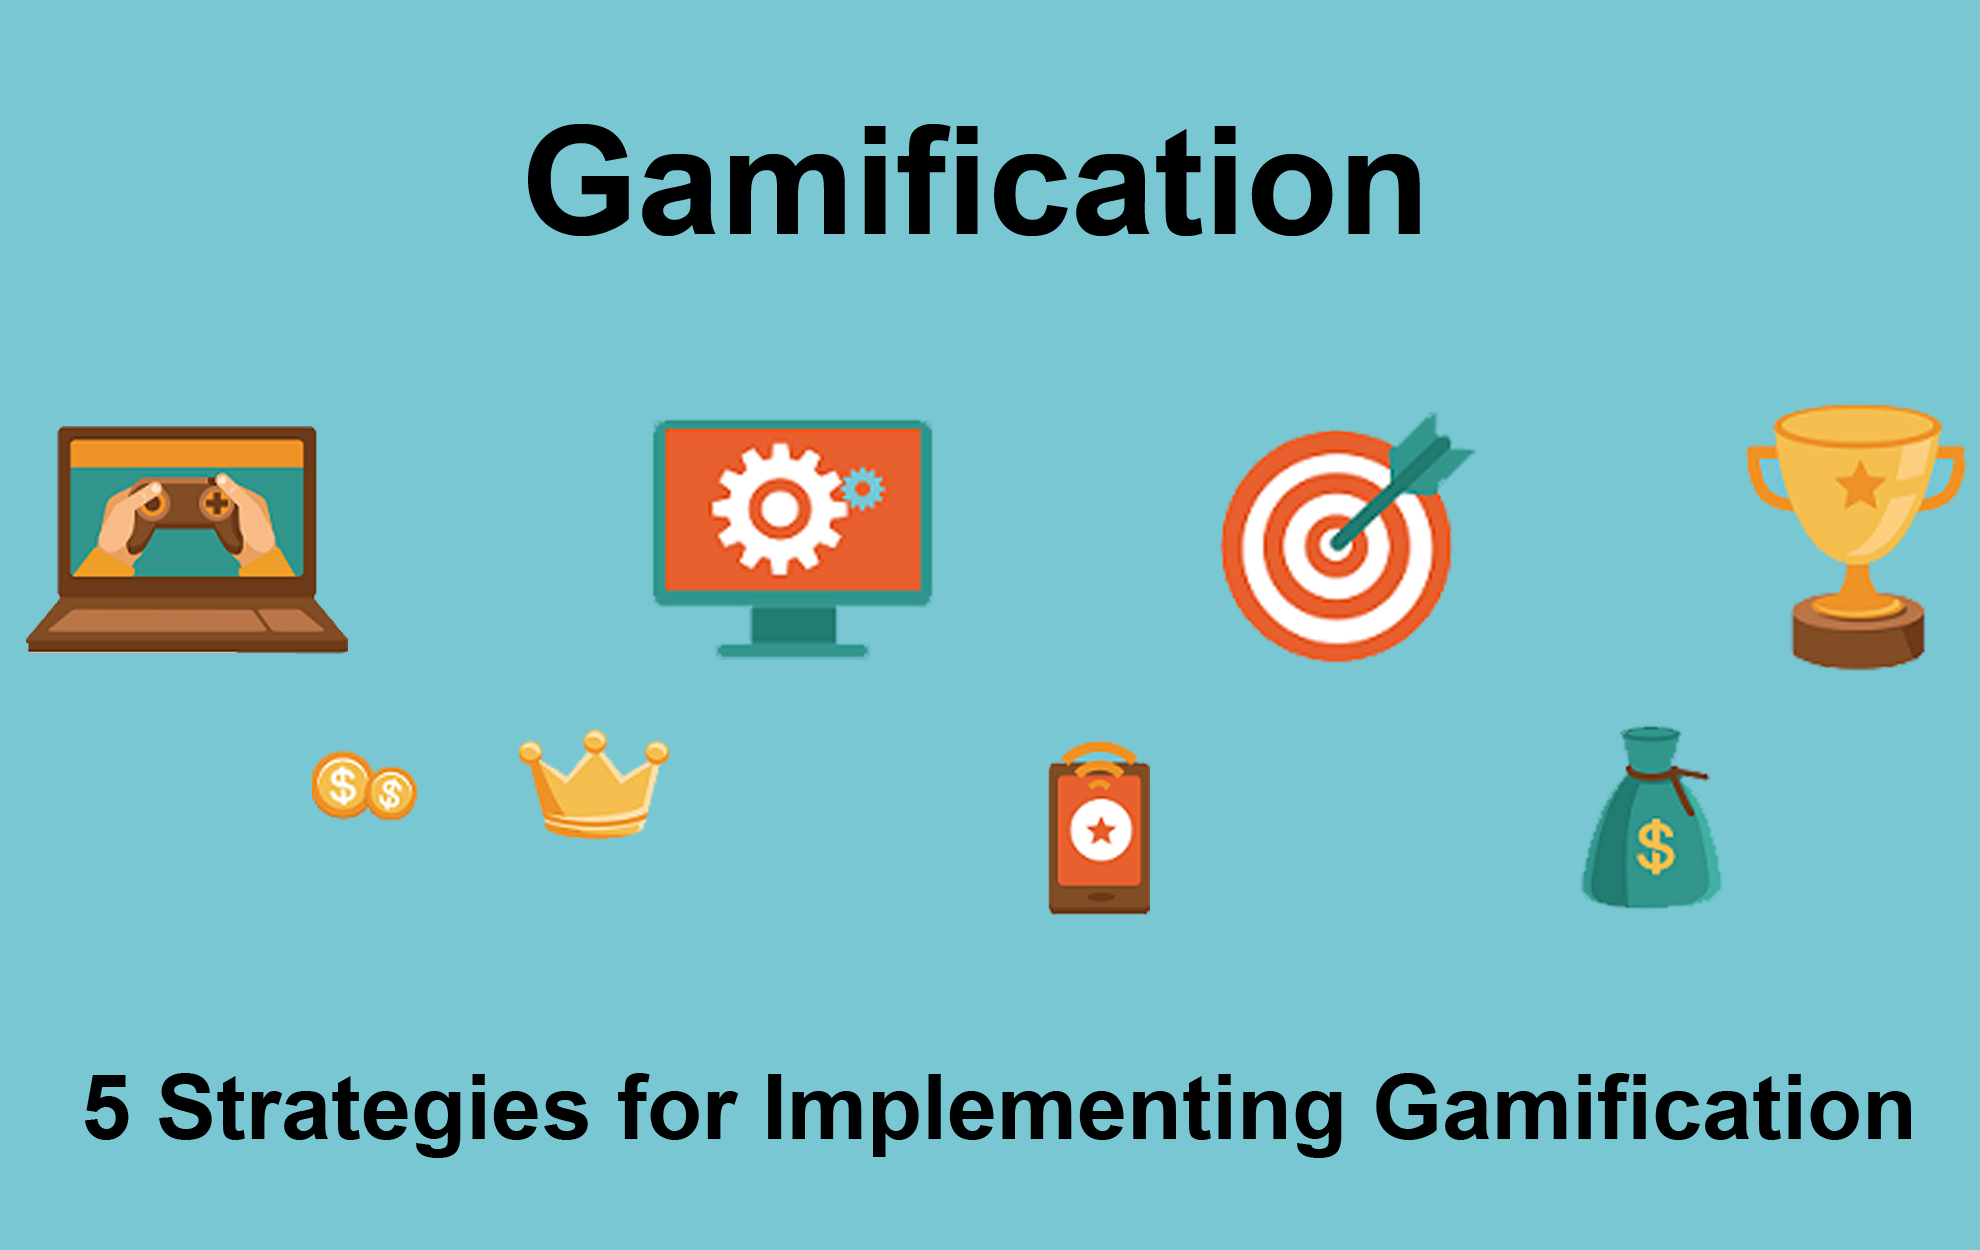 5 Strategies for Implementing Gamification